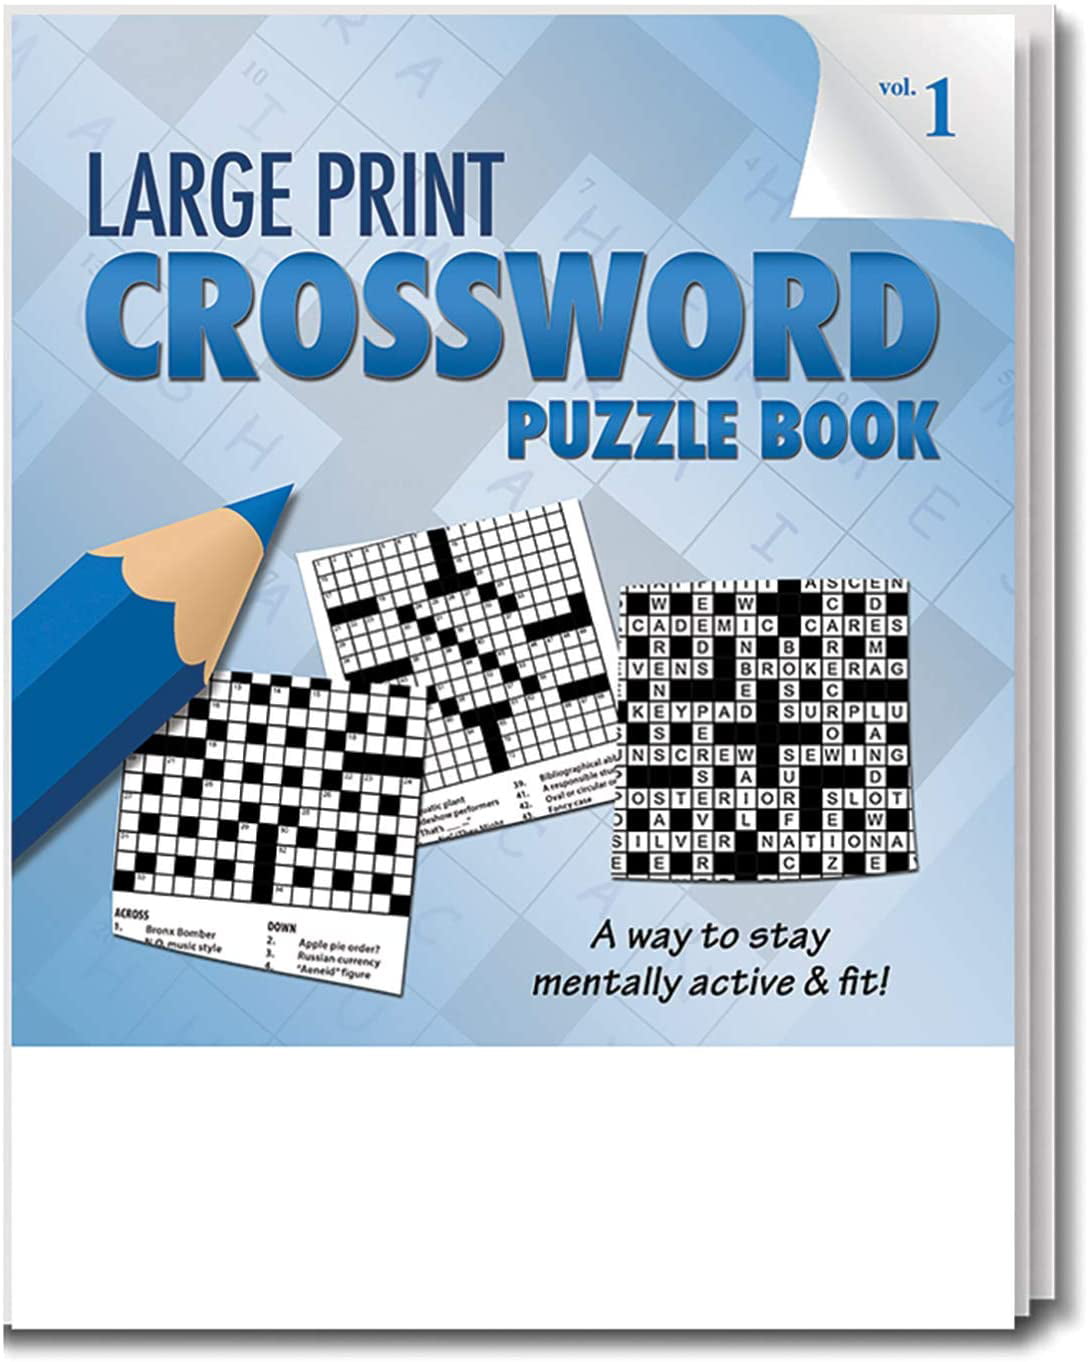 25 Pack Safety Magnets Large Print Crossword Puzzle Books for Seniors in Bulk Volume 1 